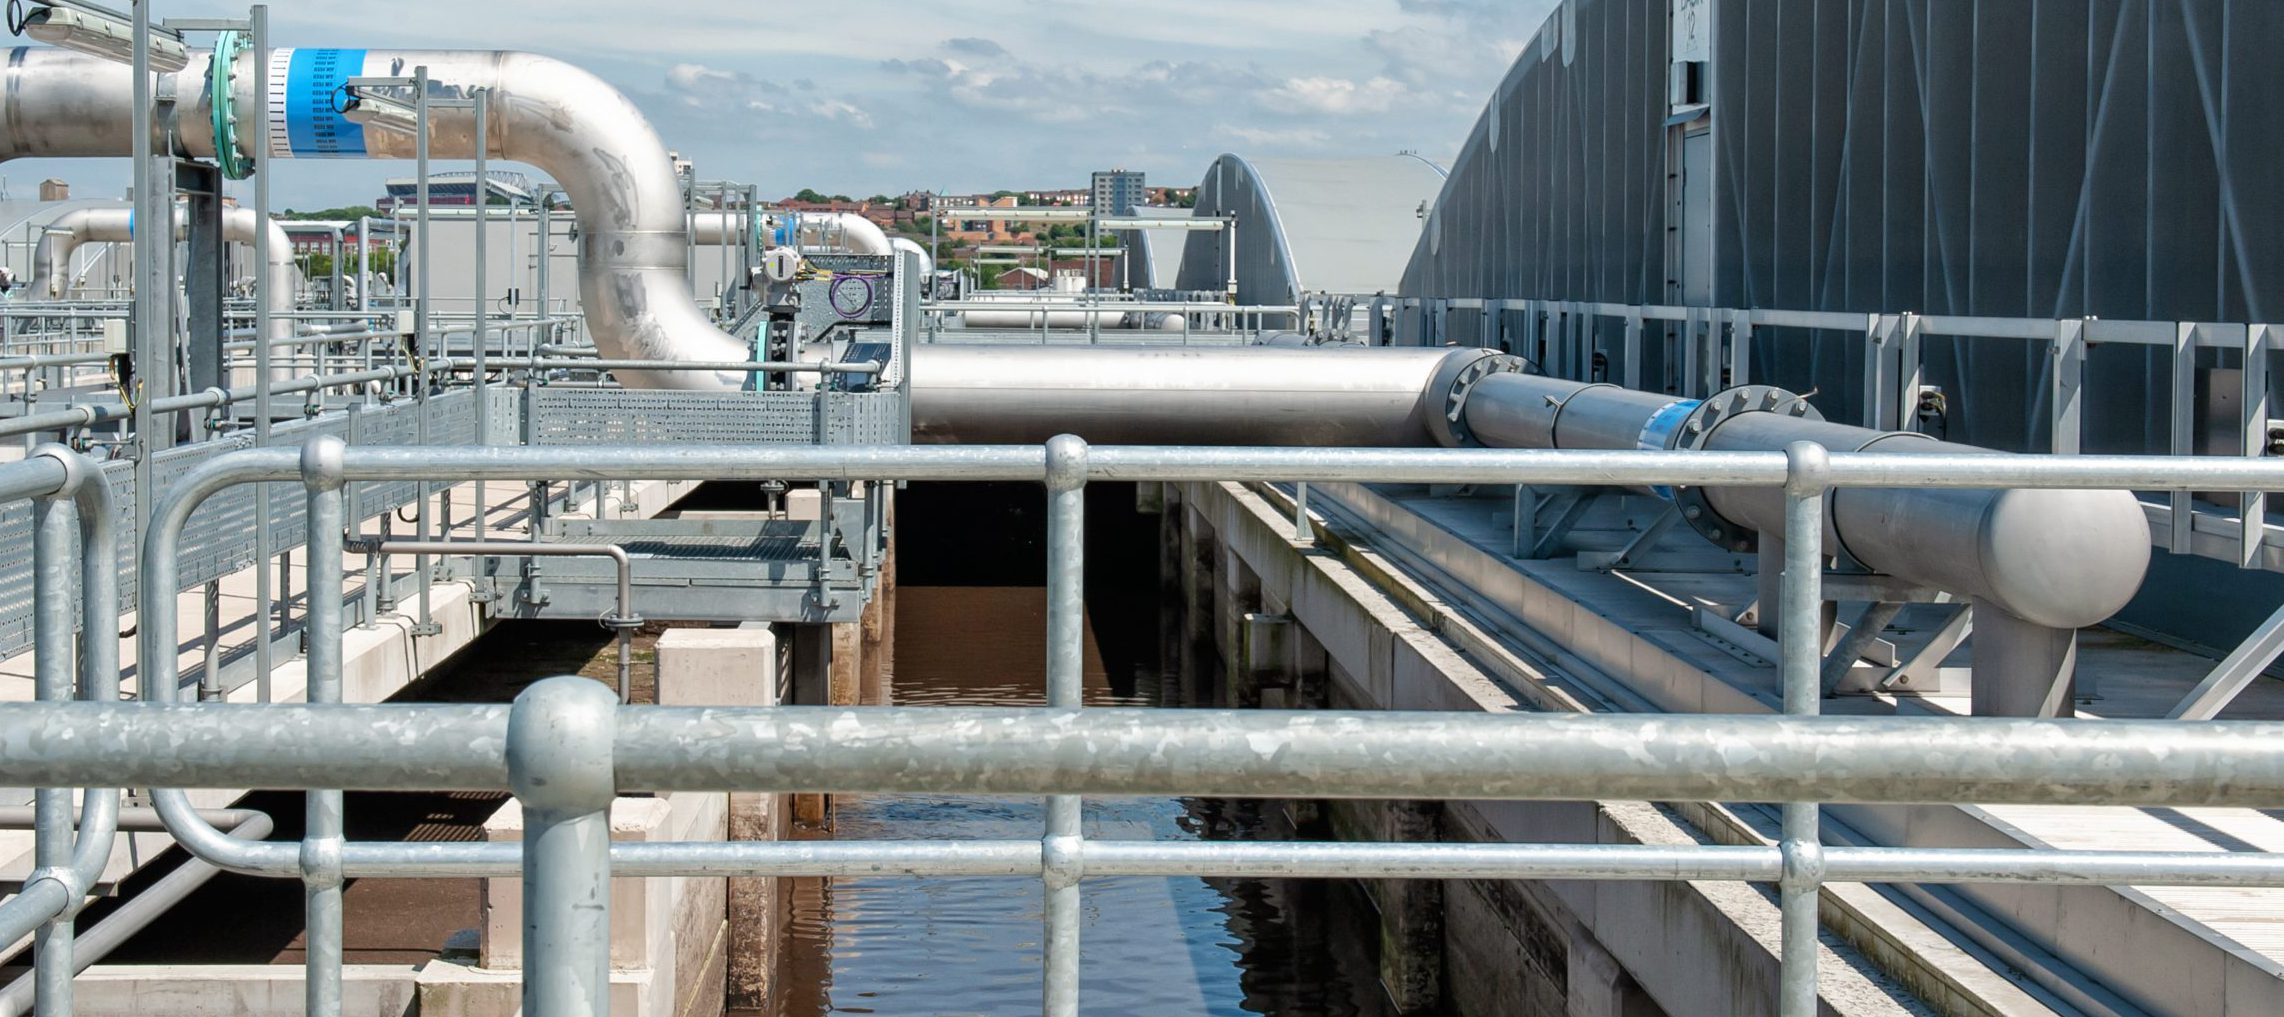 United Utilities use SmartWaste to drive improvements in environmental performance reporting